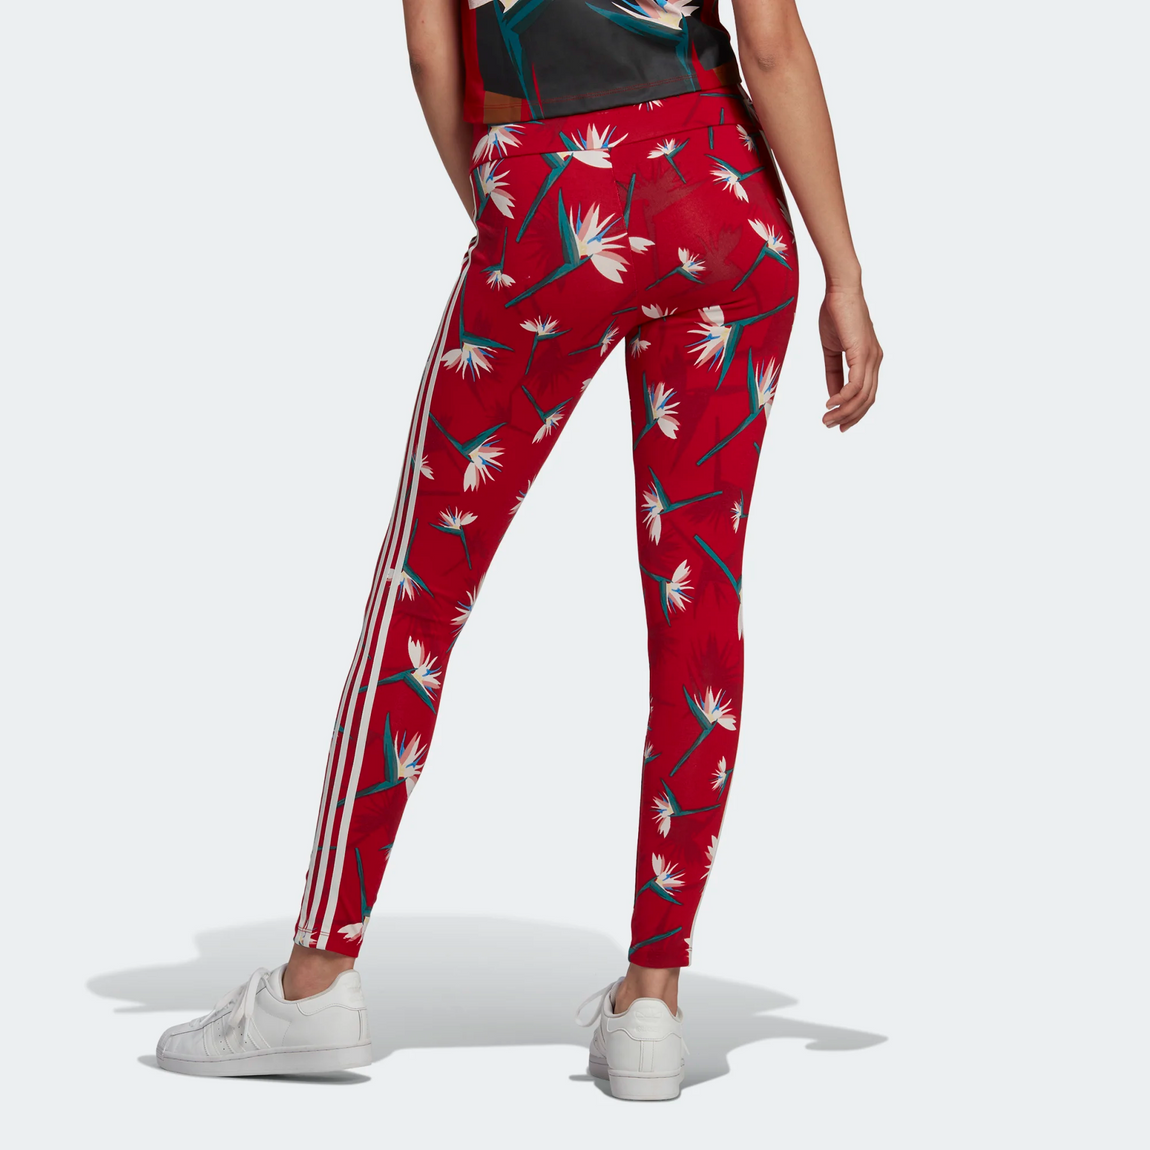 Adidas Thebe Women's Leggings (Red/Multicolor) –